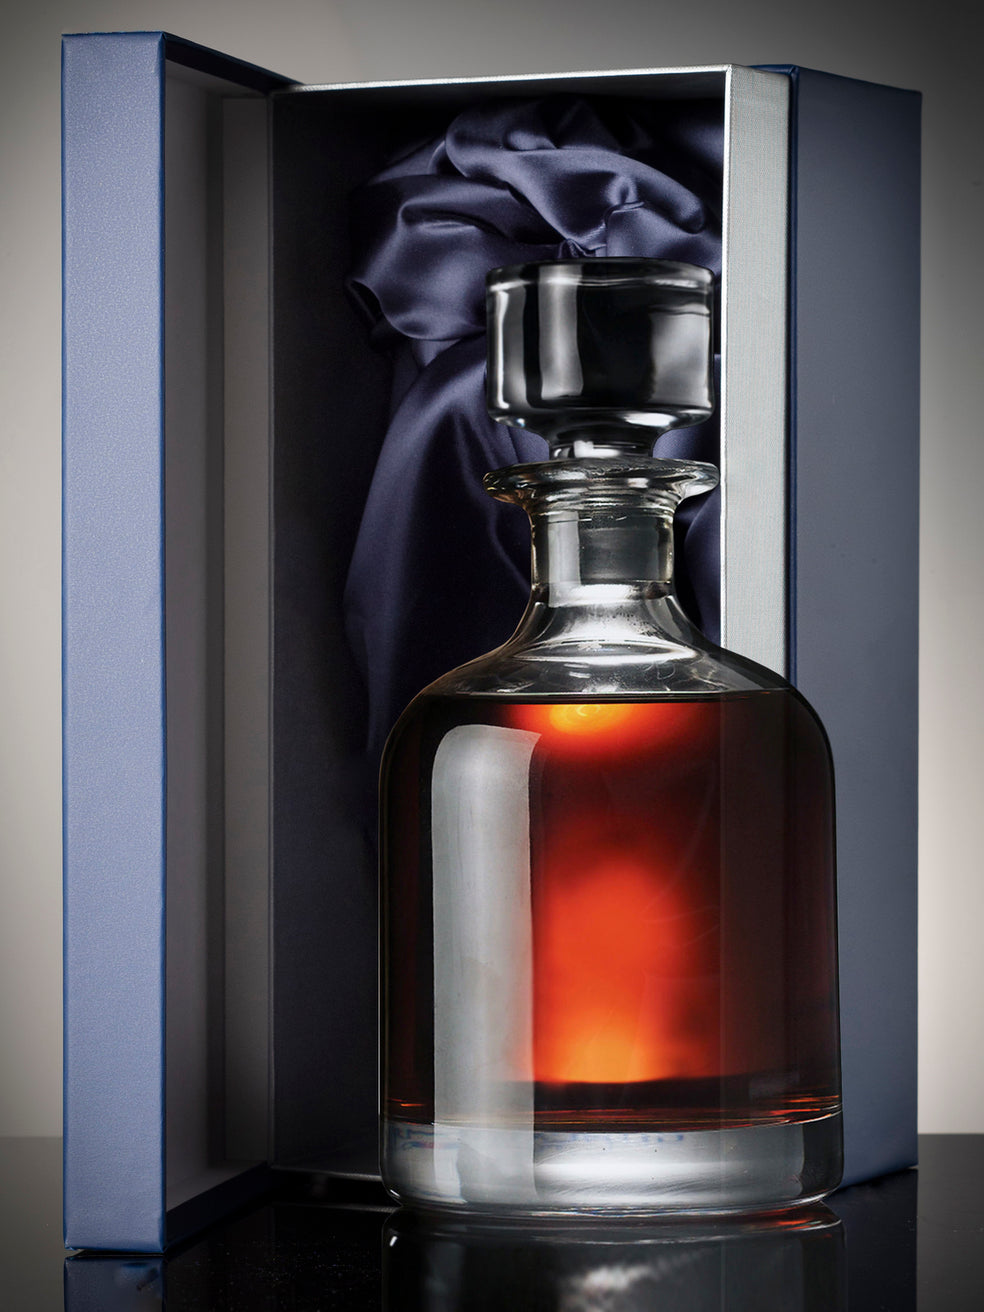 Iona Lead-Free Crystal Decanter  in Presentation Box by Glencairn